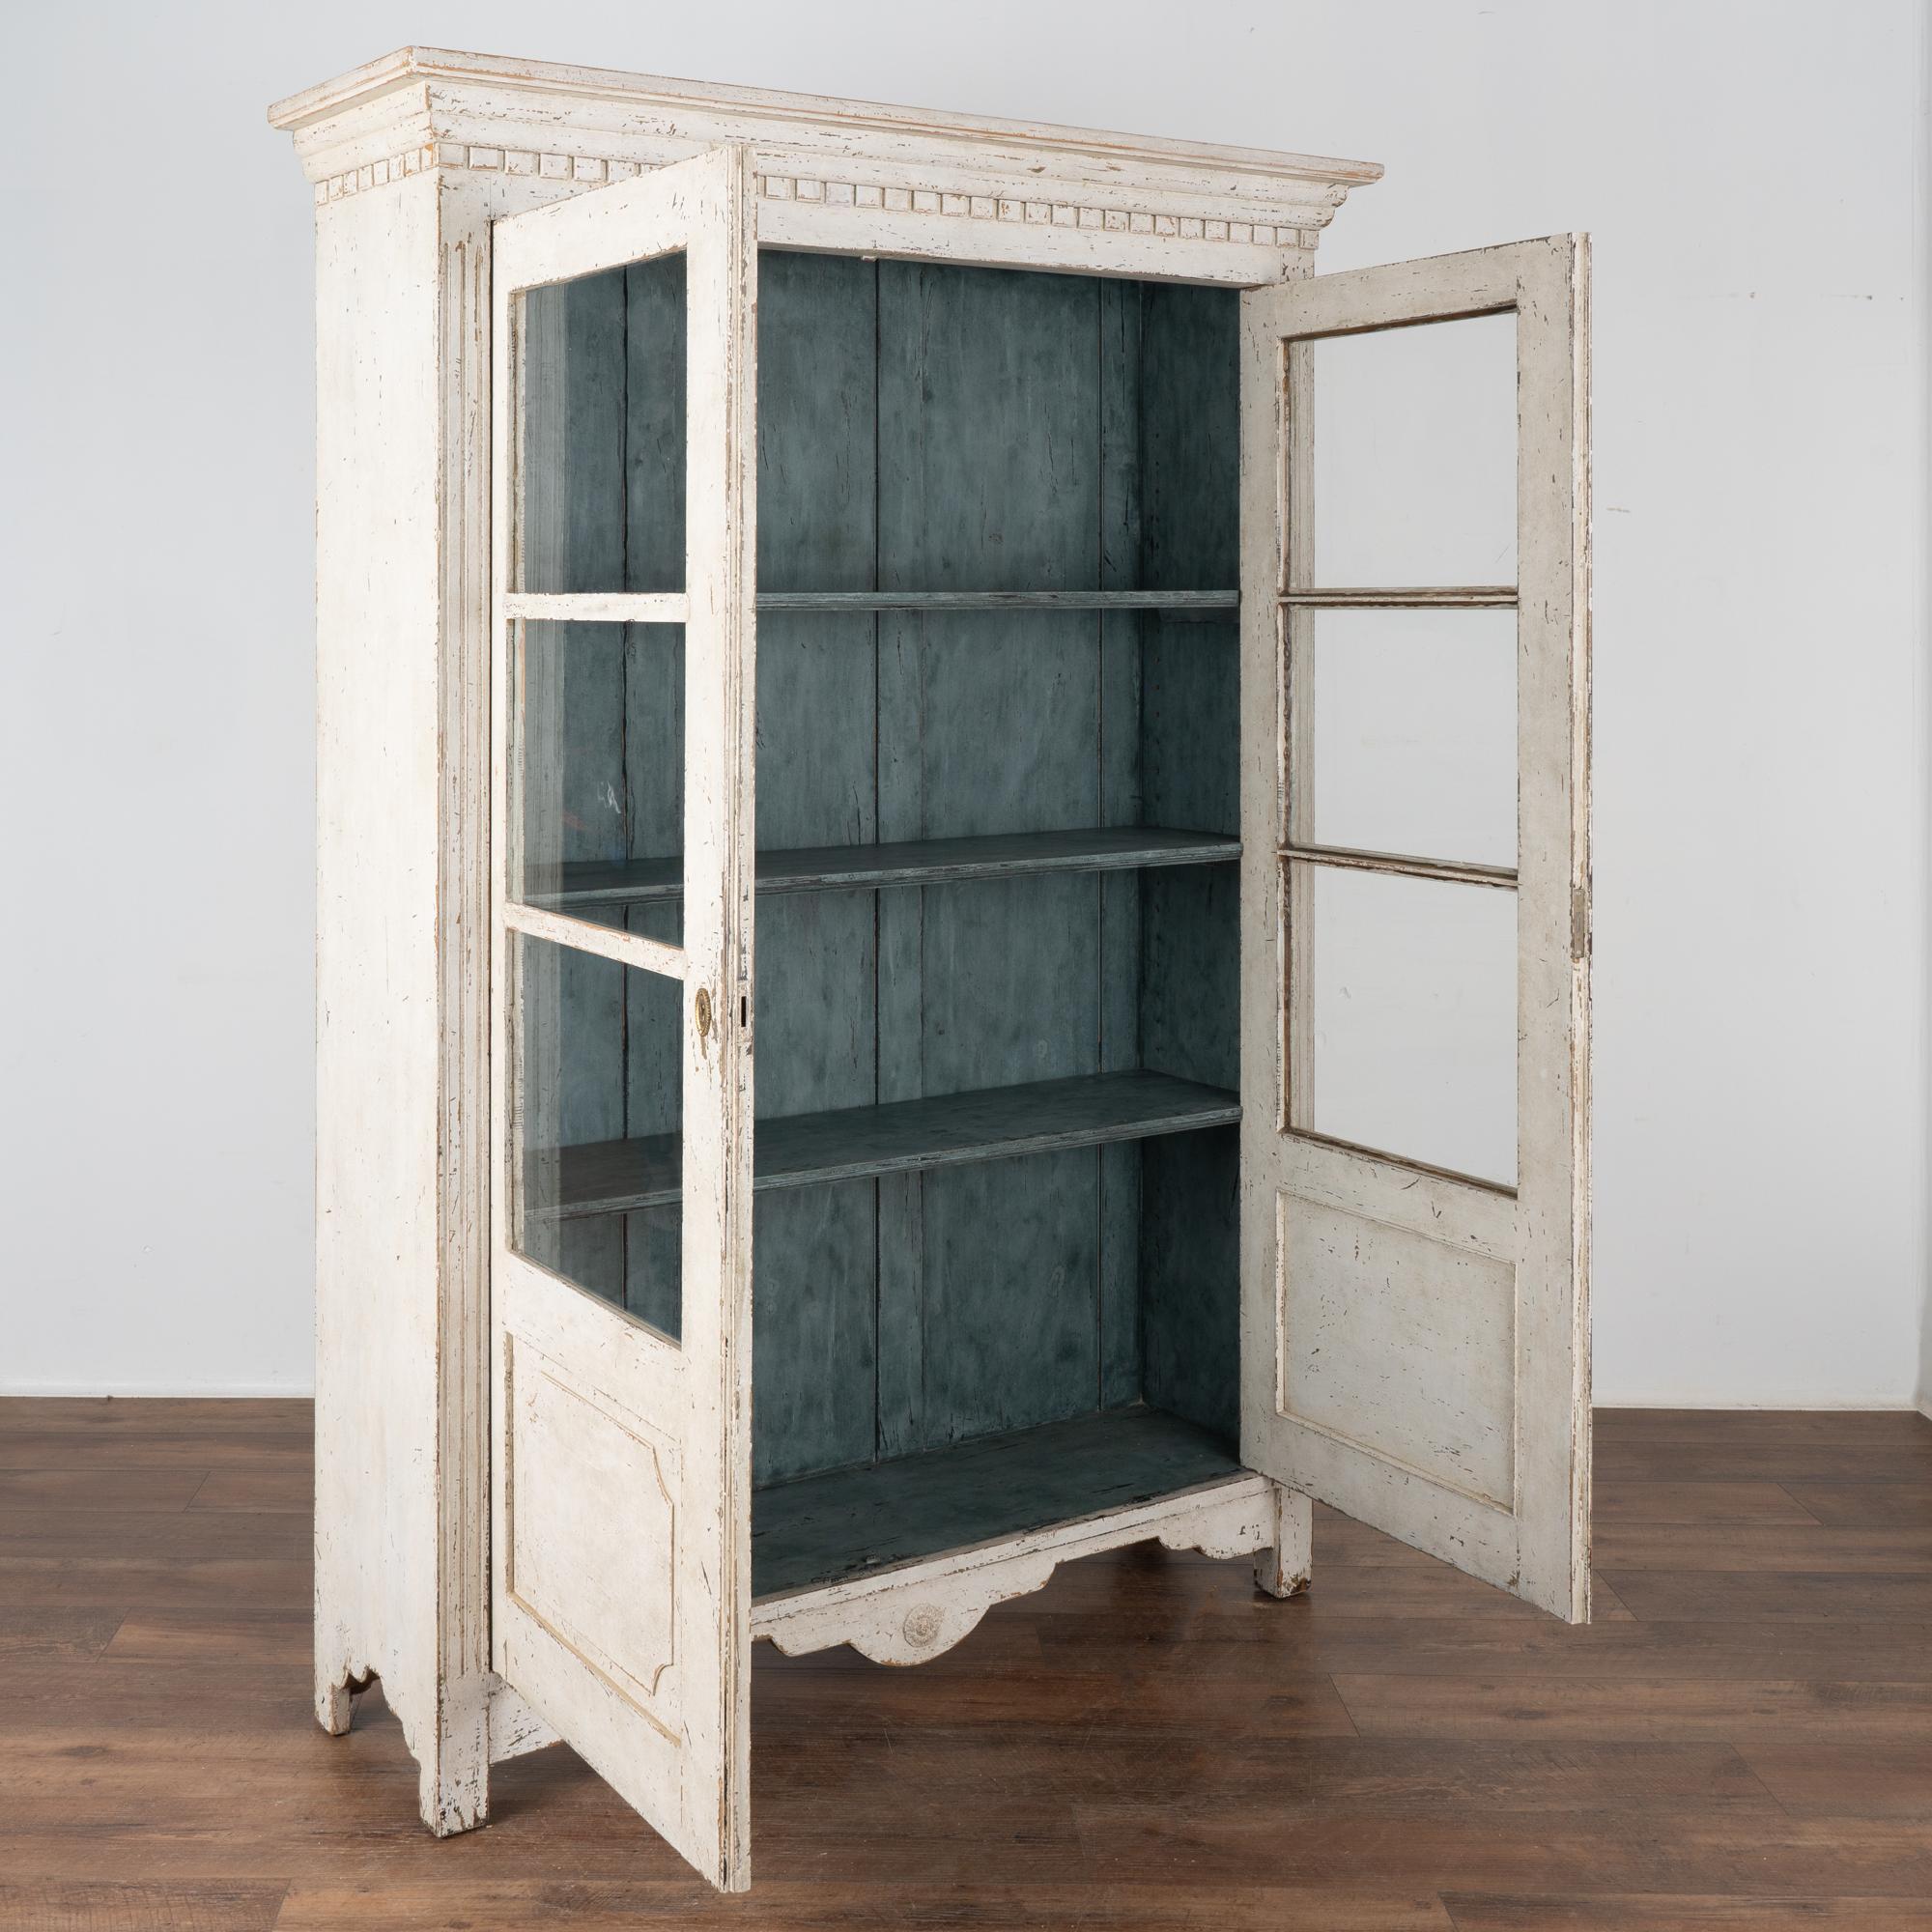 Country White Painted Bookcase Display Cabinet, Sweden circa 1820-40